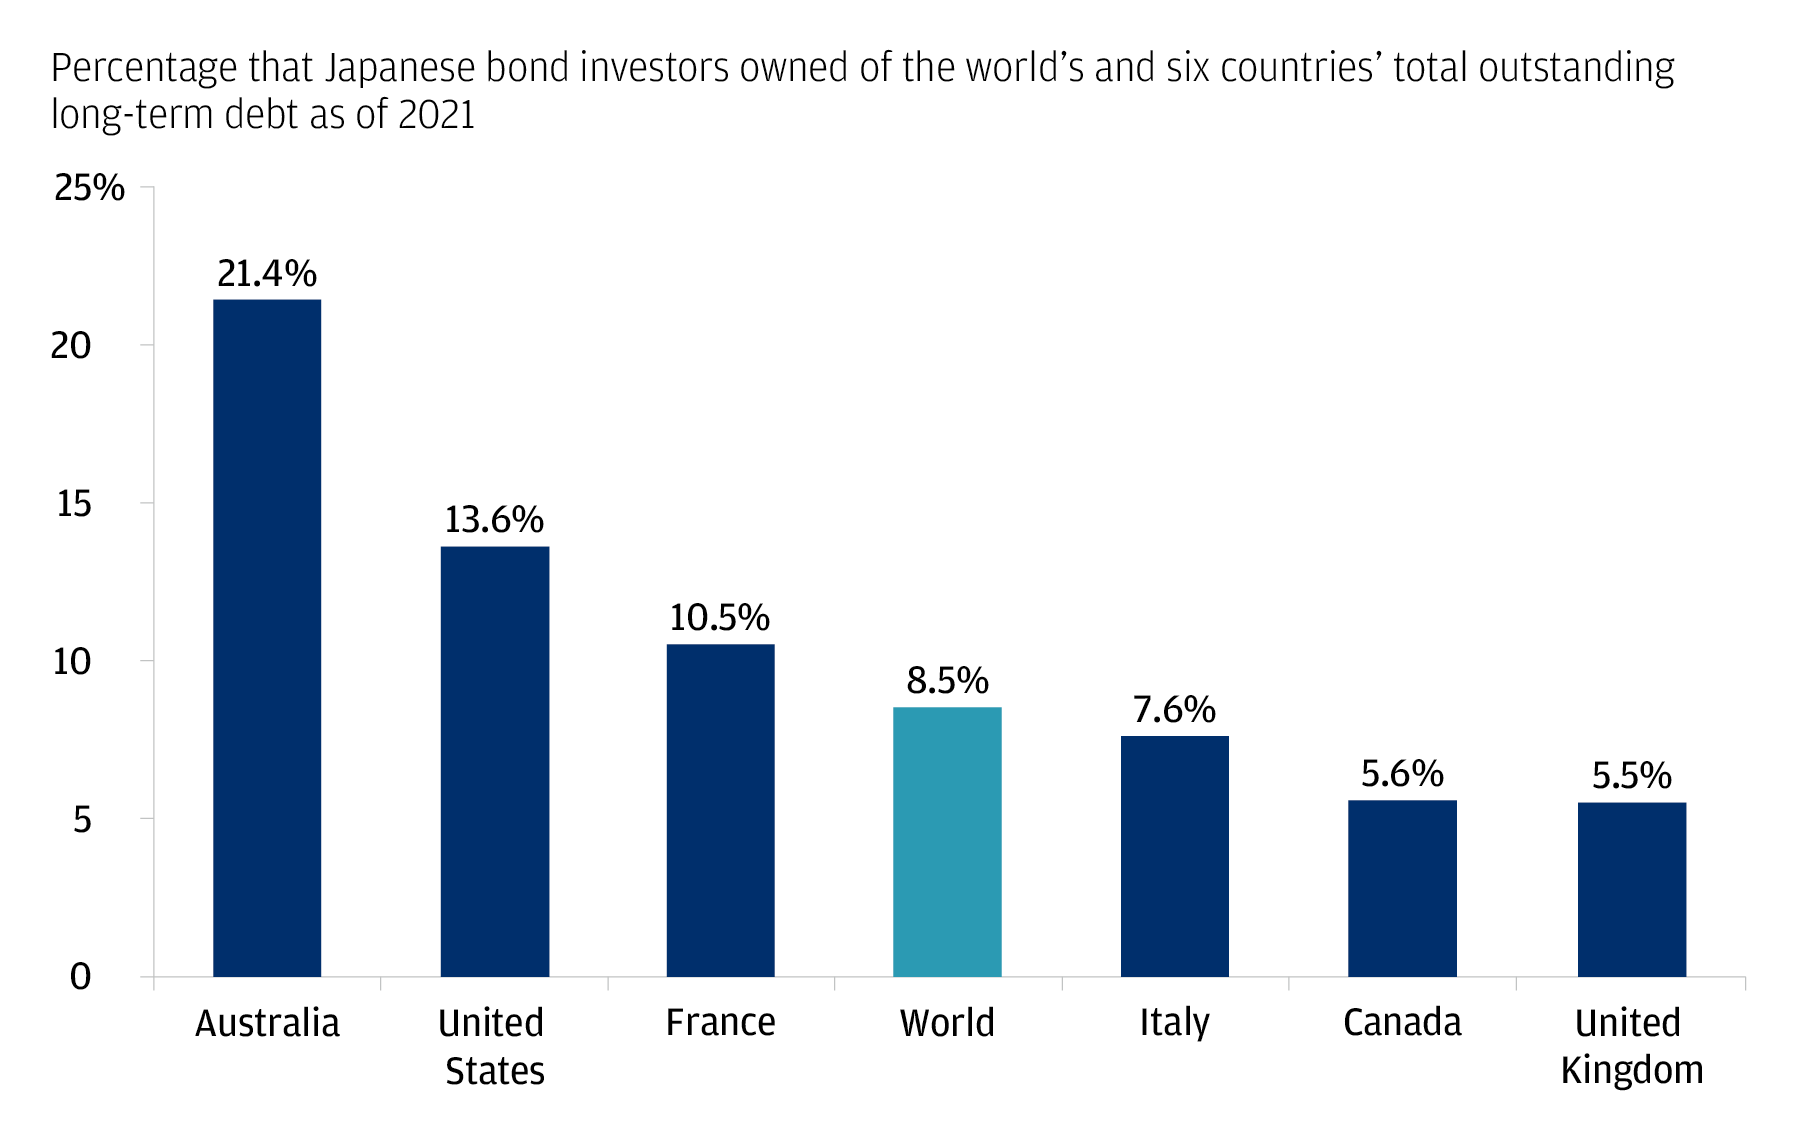 The chart is a bar chart that describes the % of the world and six countries’ total outstanding long-term debt owned by Japanese bond investors.